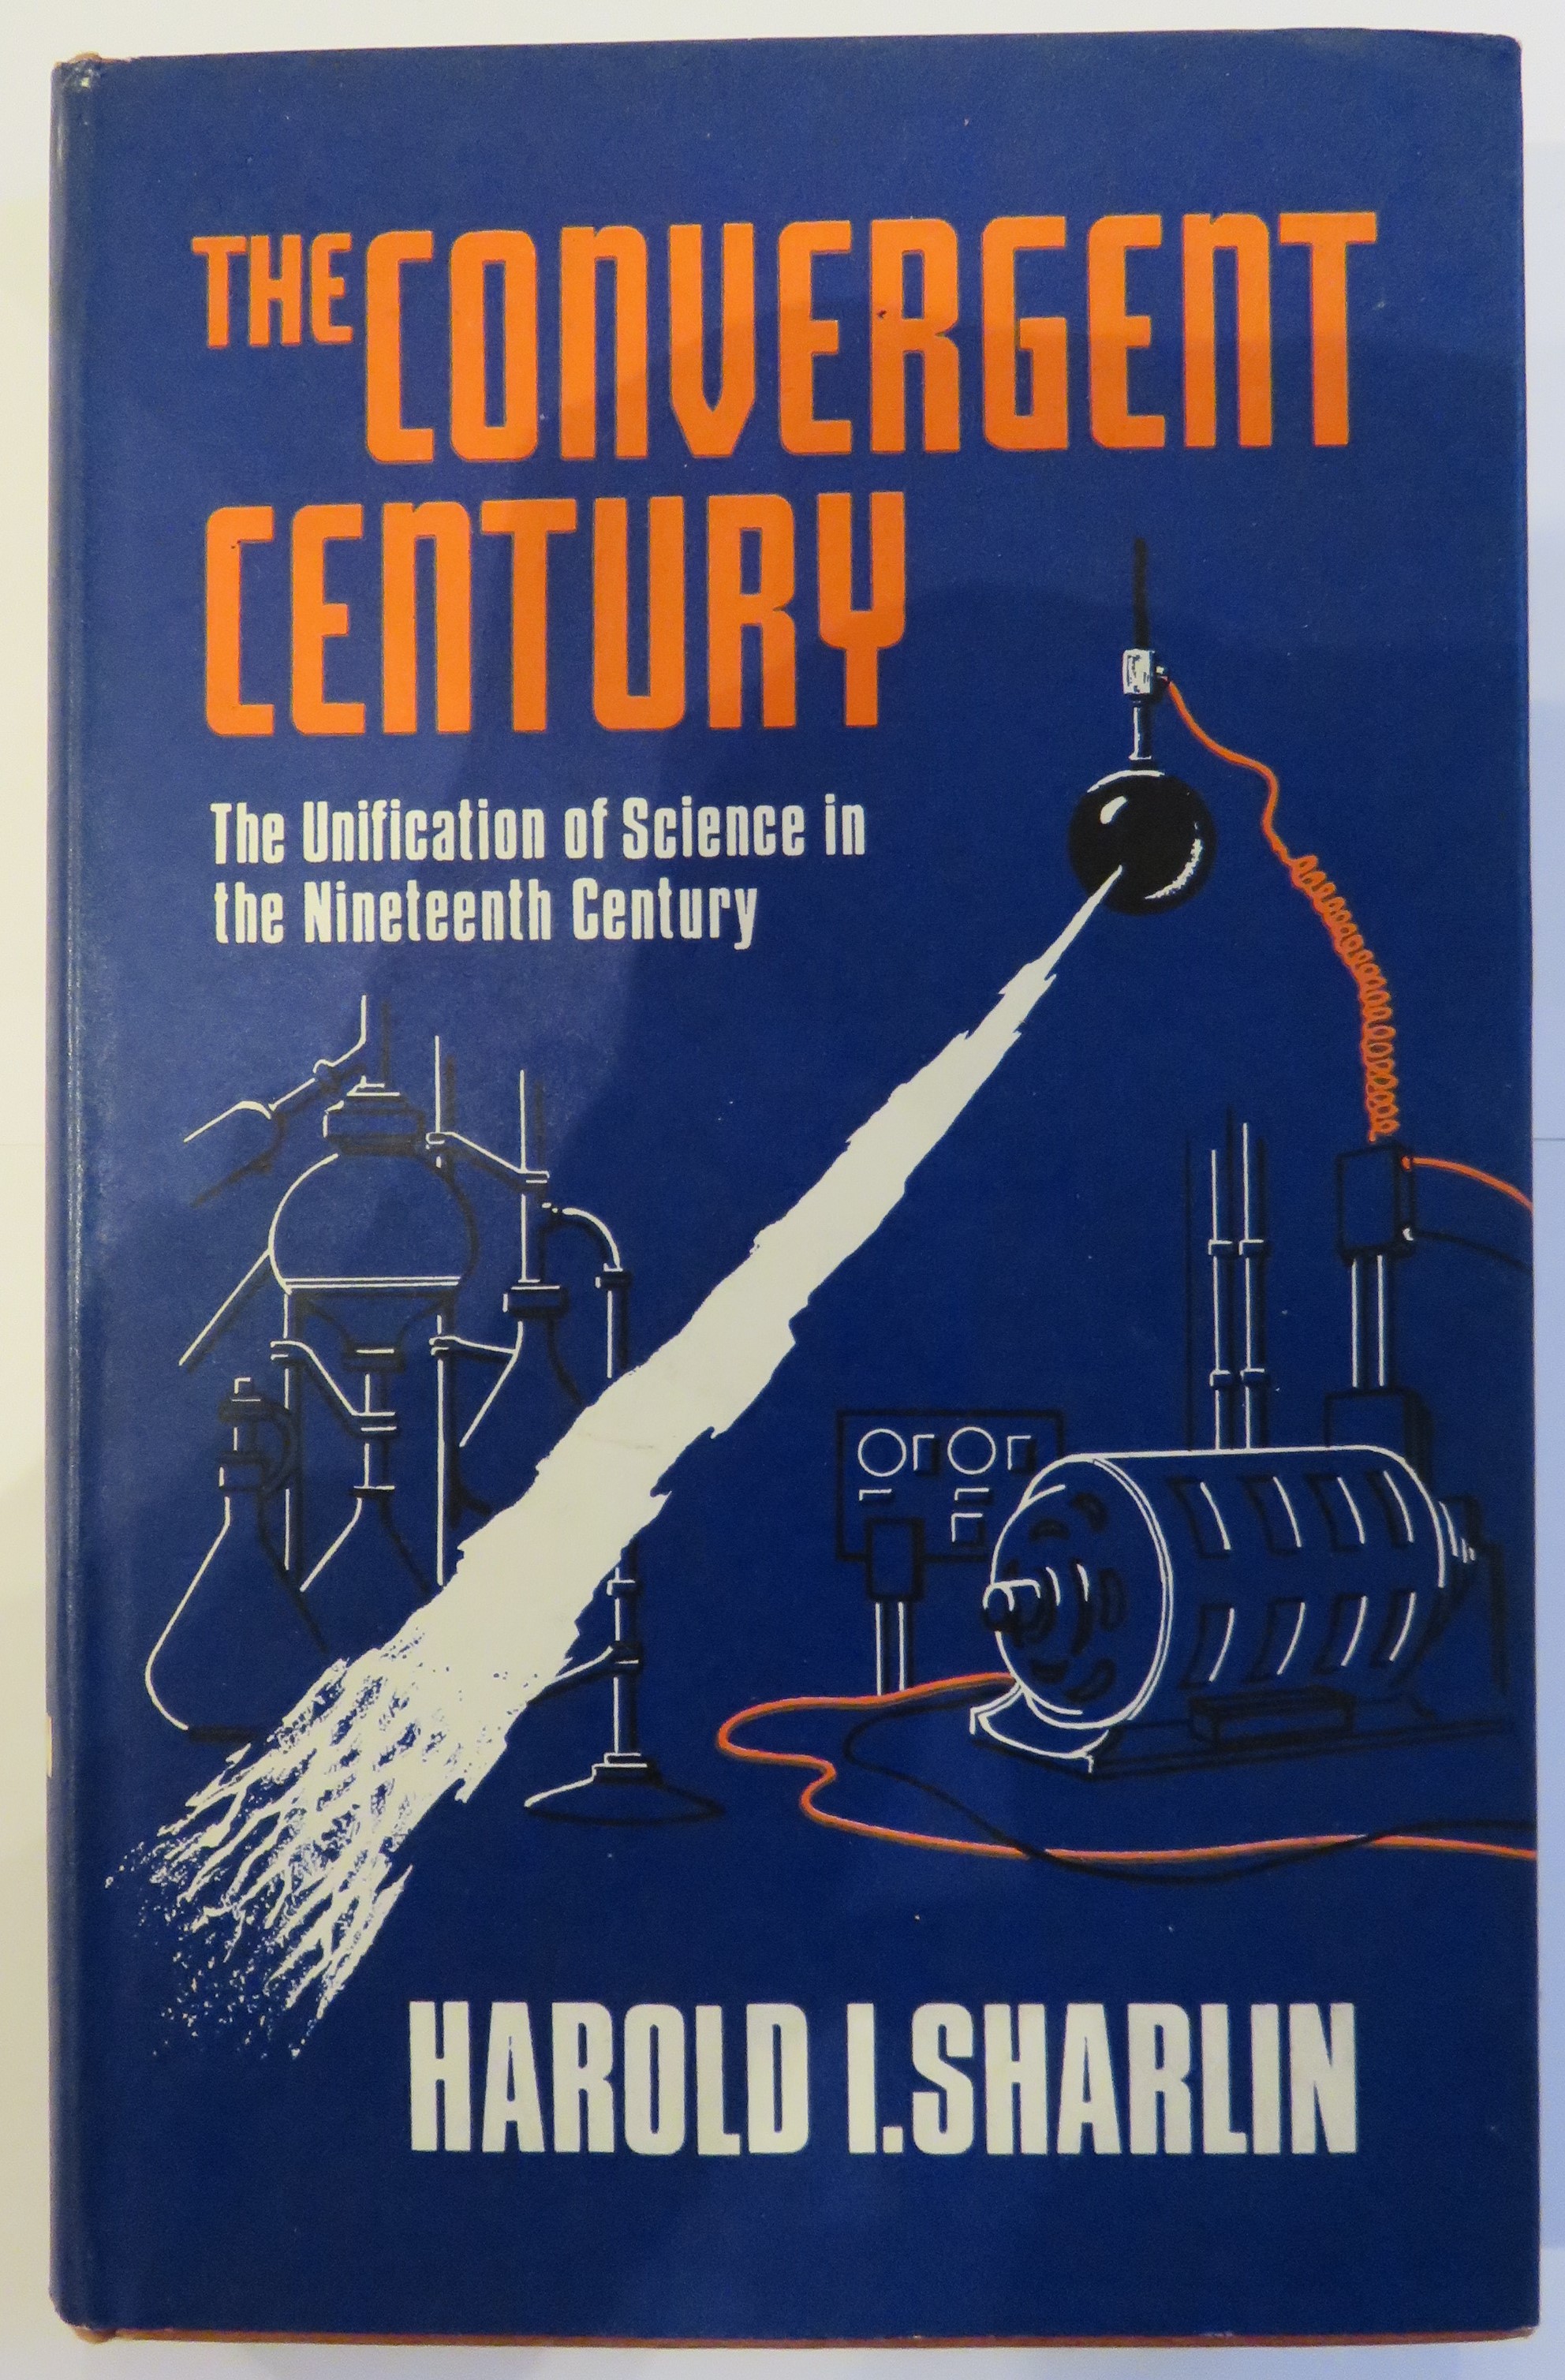 The Convergent Century the Unification of Science in the Nineteenth Century